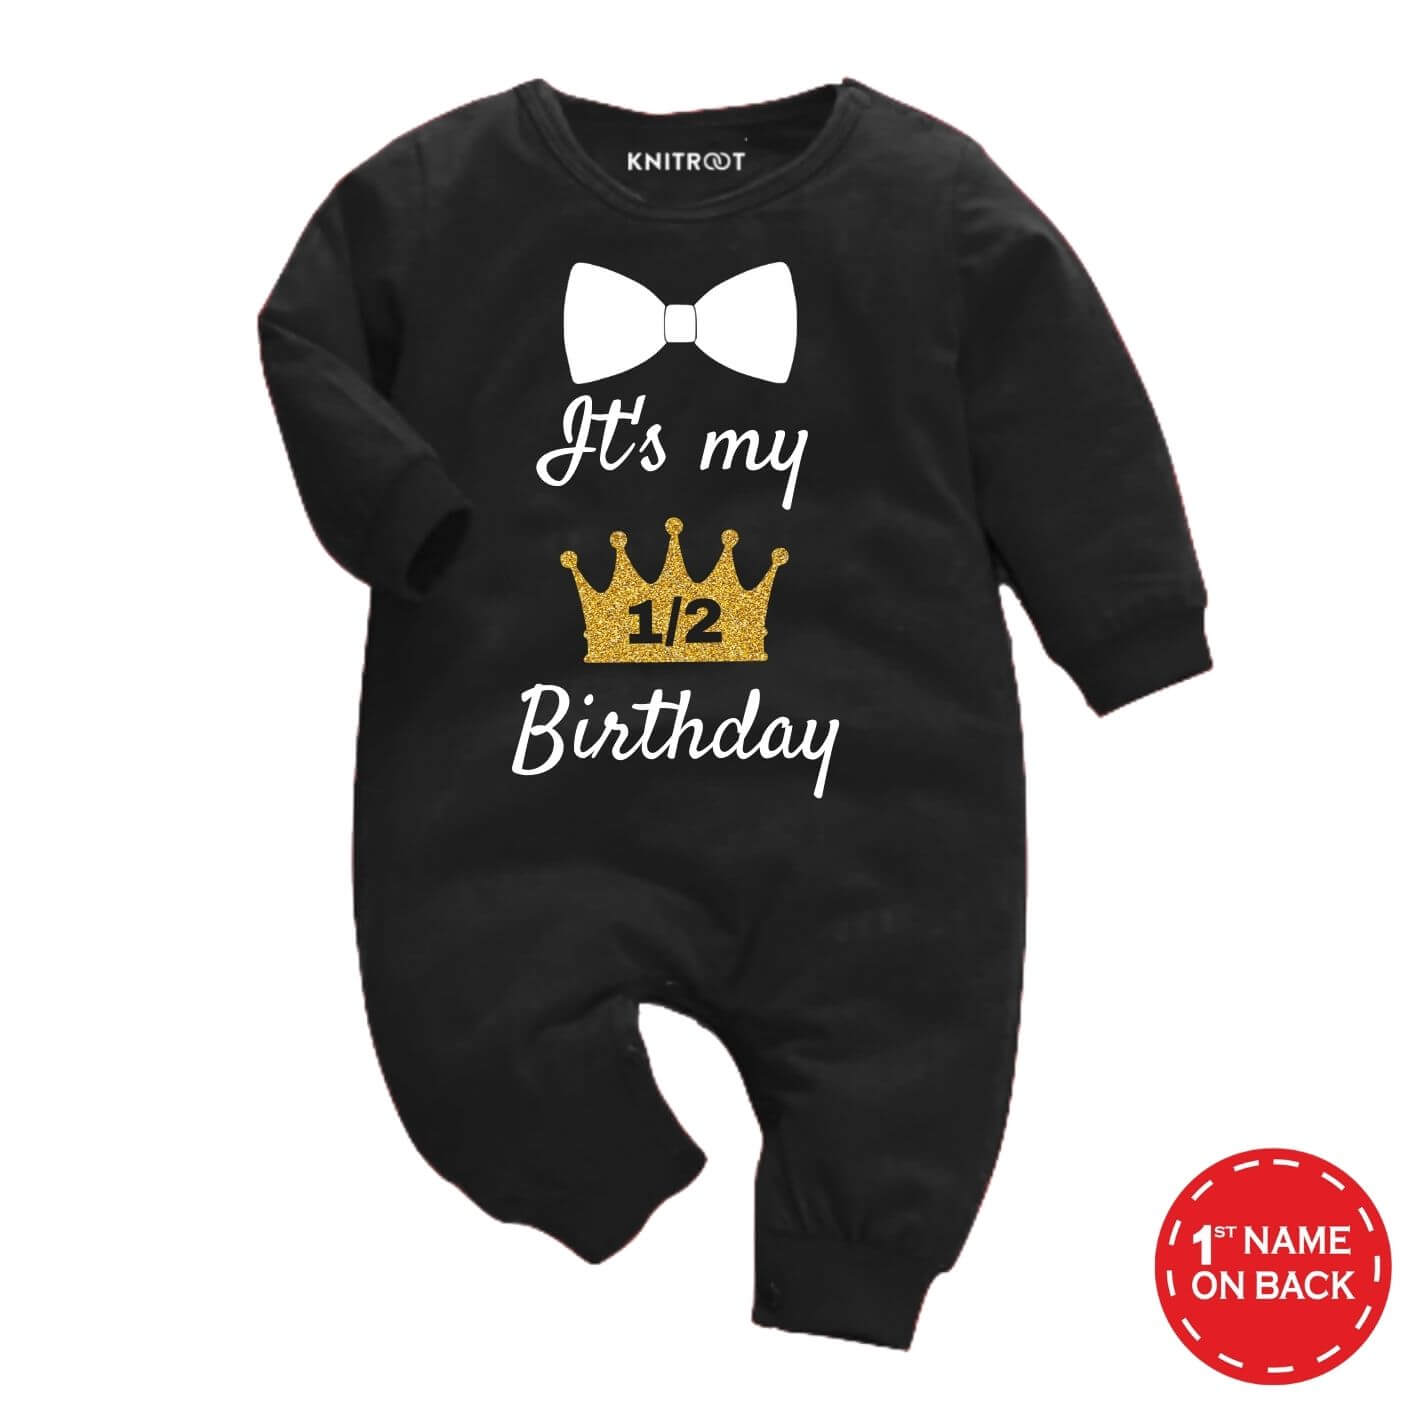 Baby Boy Clothes: 10 Best Adorable Outfits for Newborns – Carriage Boutique